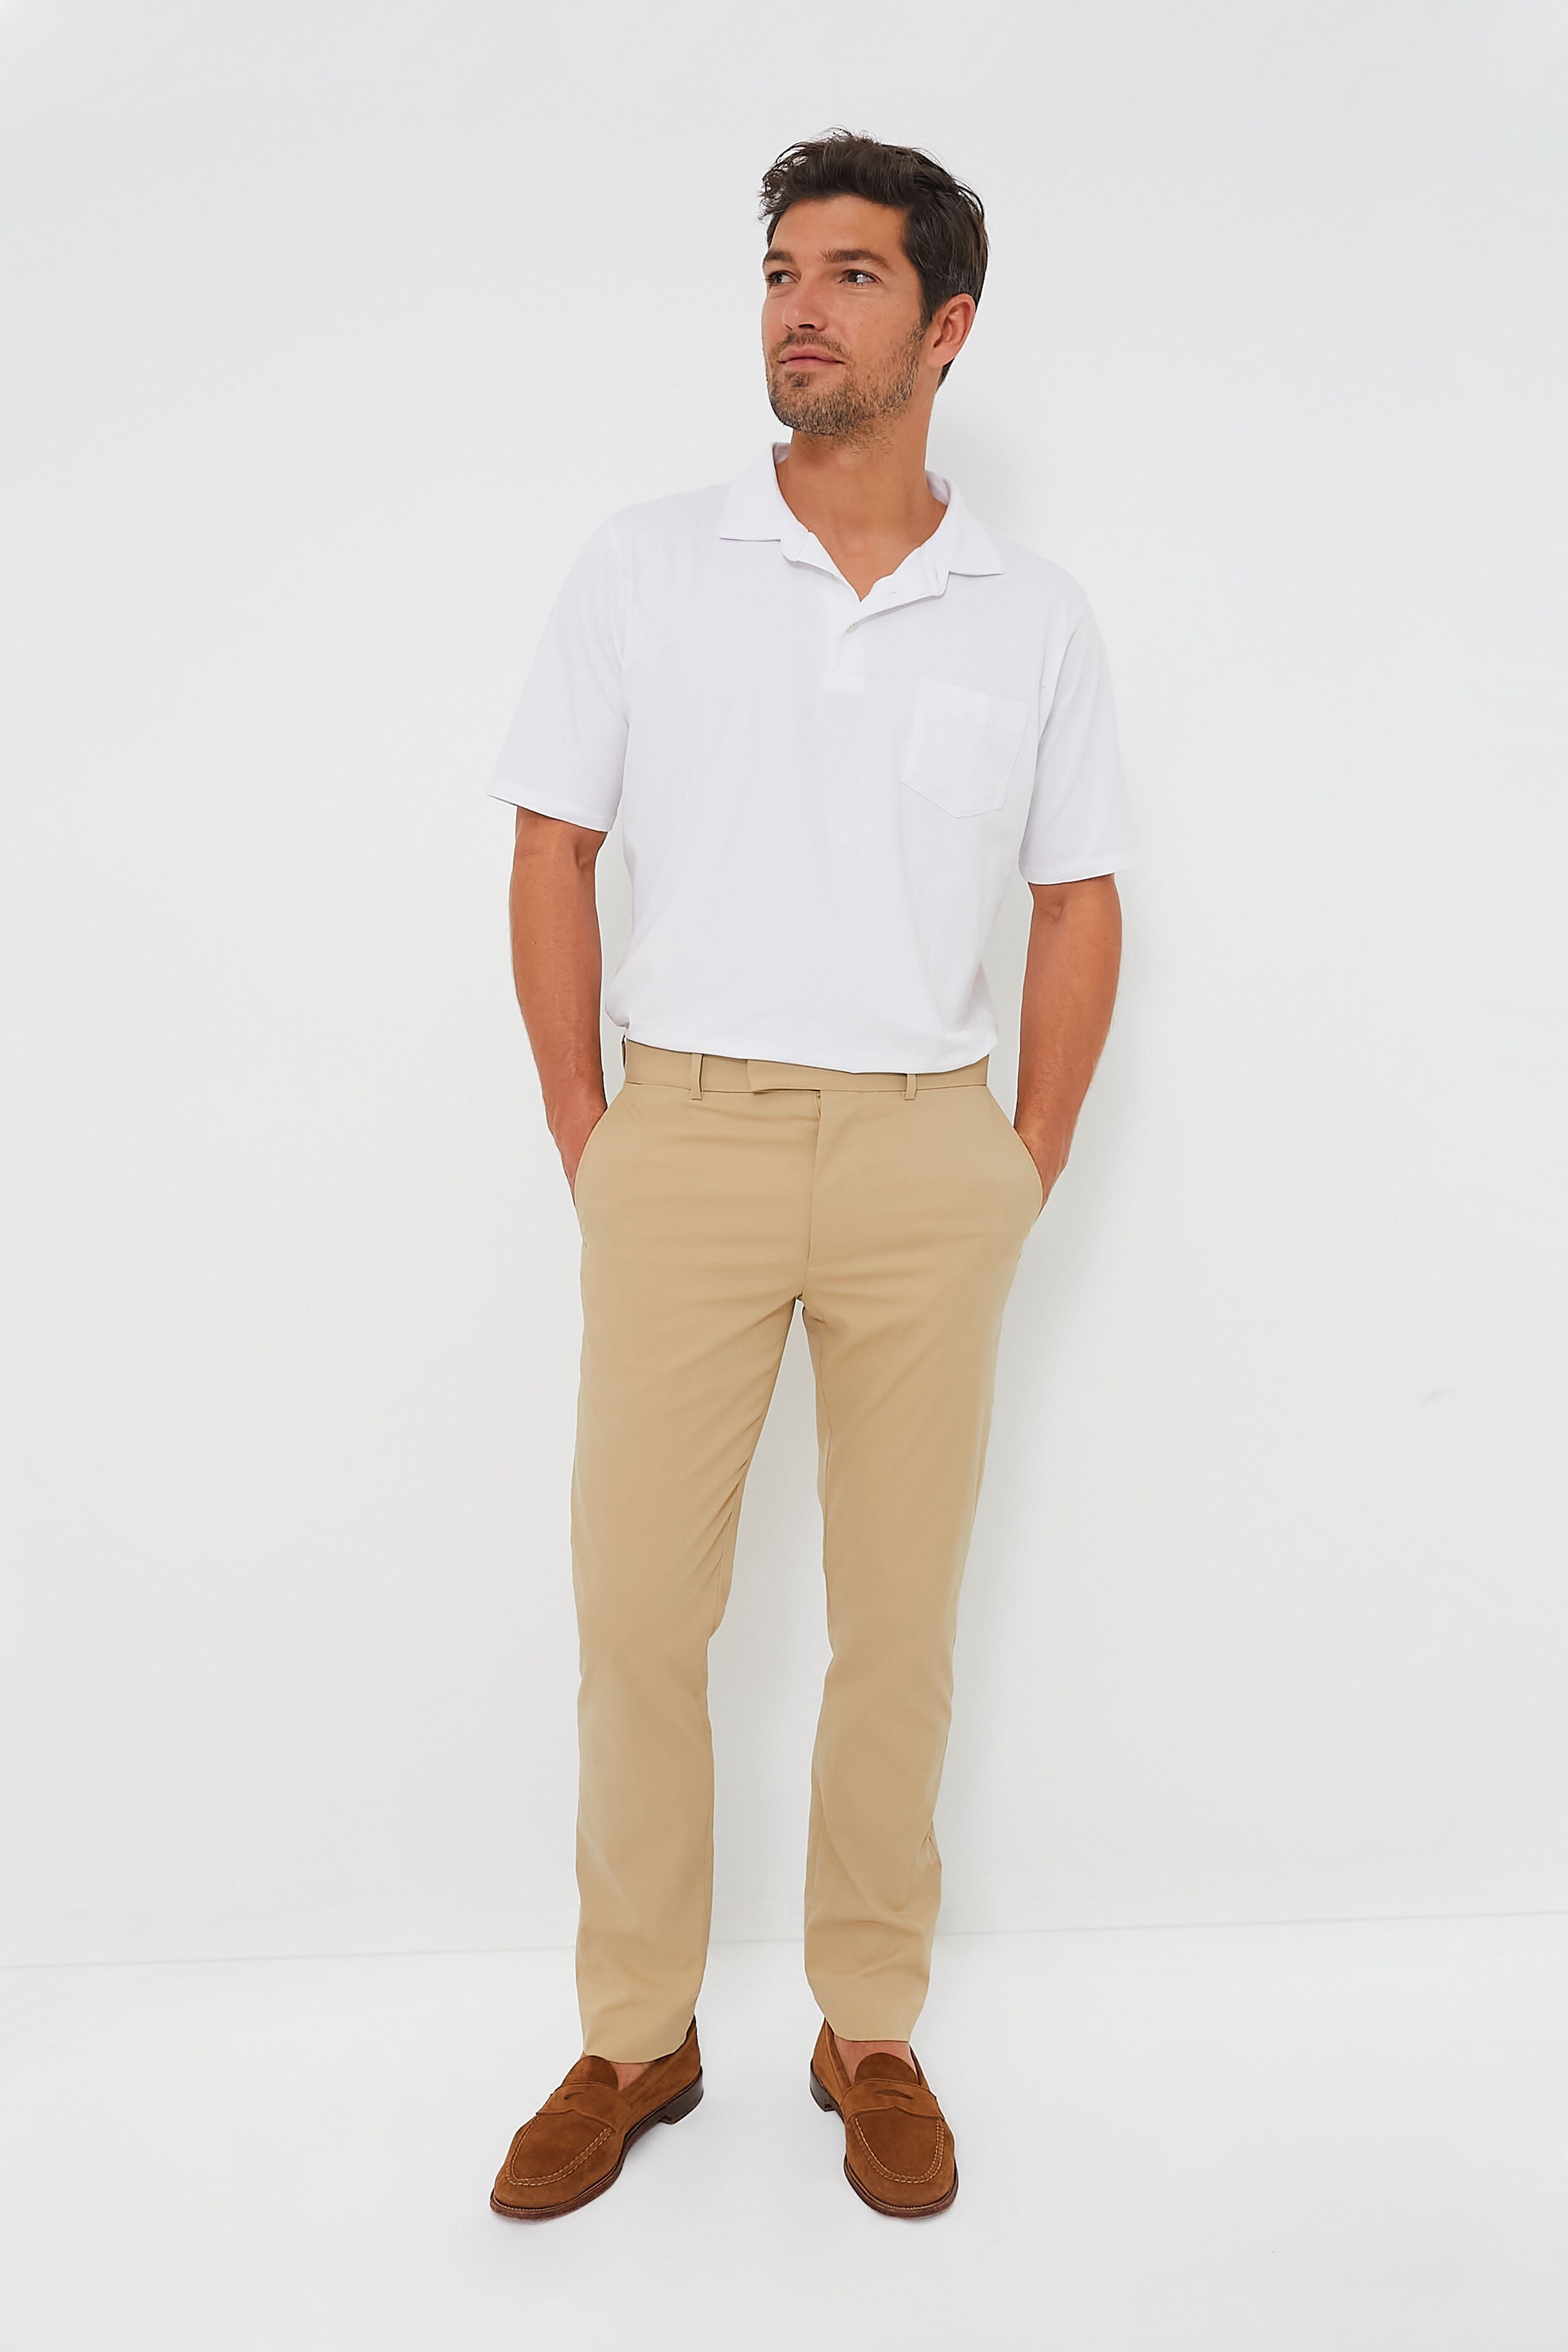 Ralph Lauren Golf Slim Fit Featherweight Performance Pant - Trousers